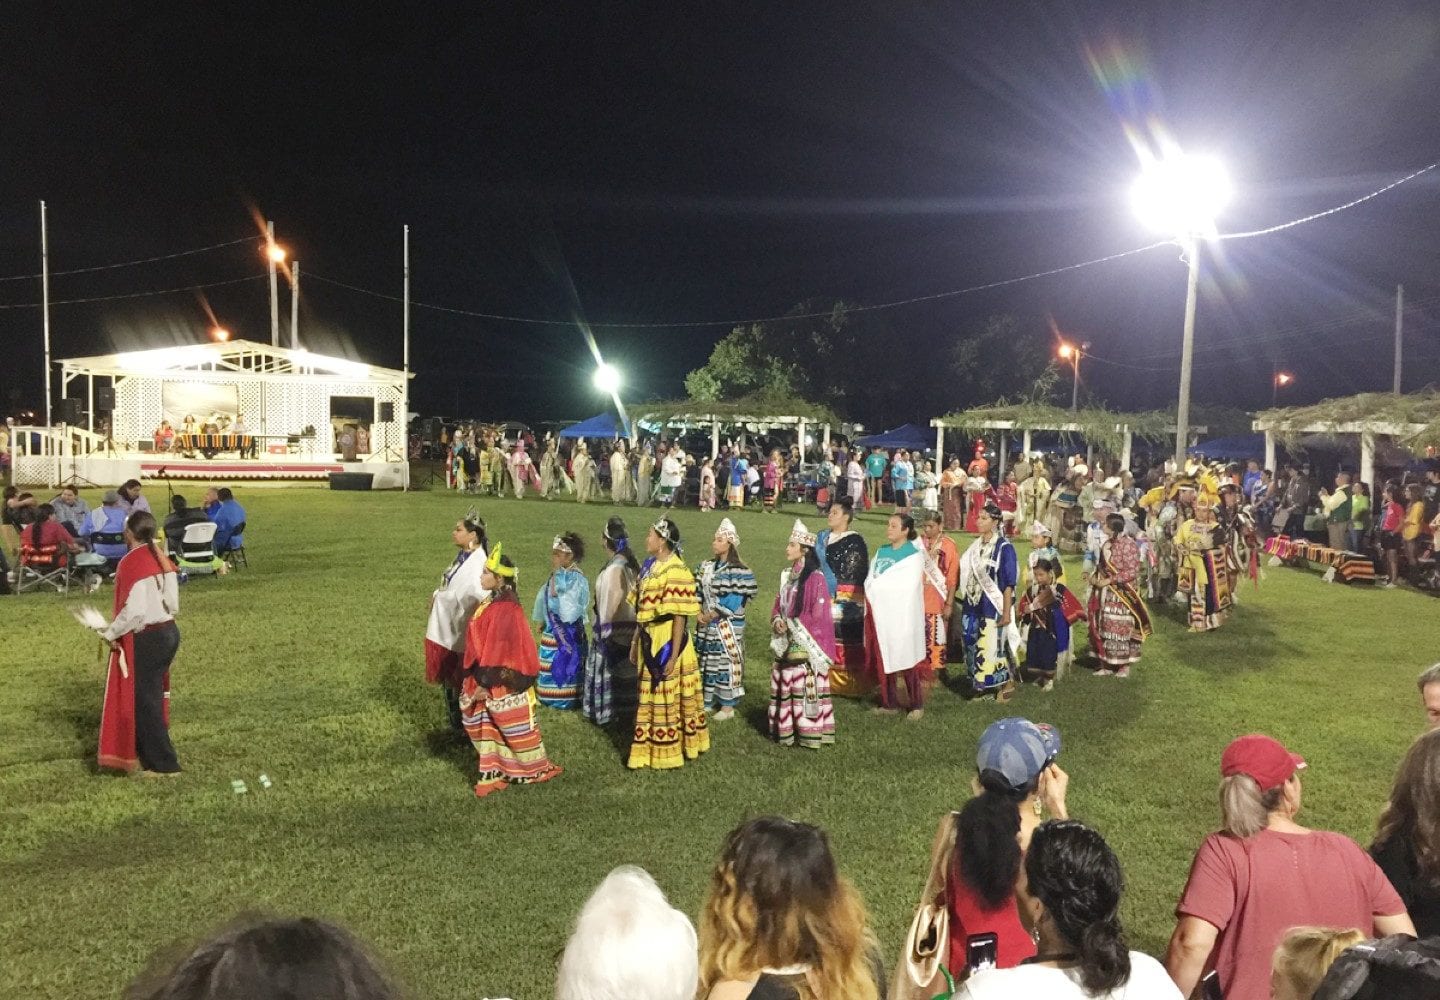 Natchitoches Tribe of Louisiana will hold Tribal Ladies Education